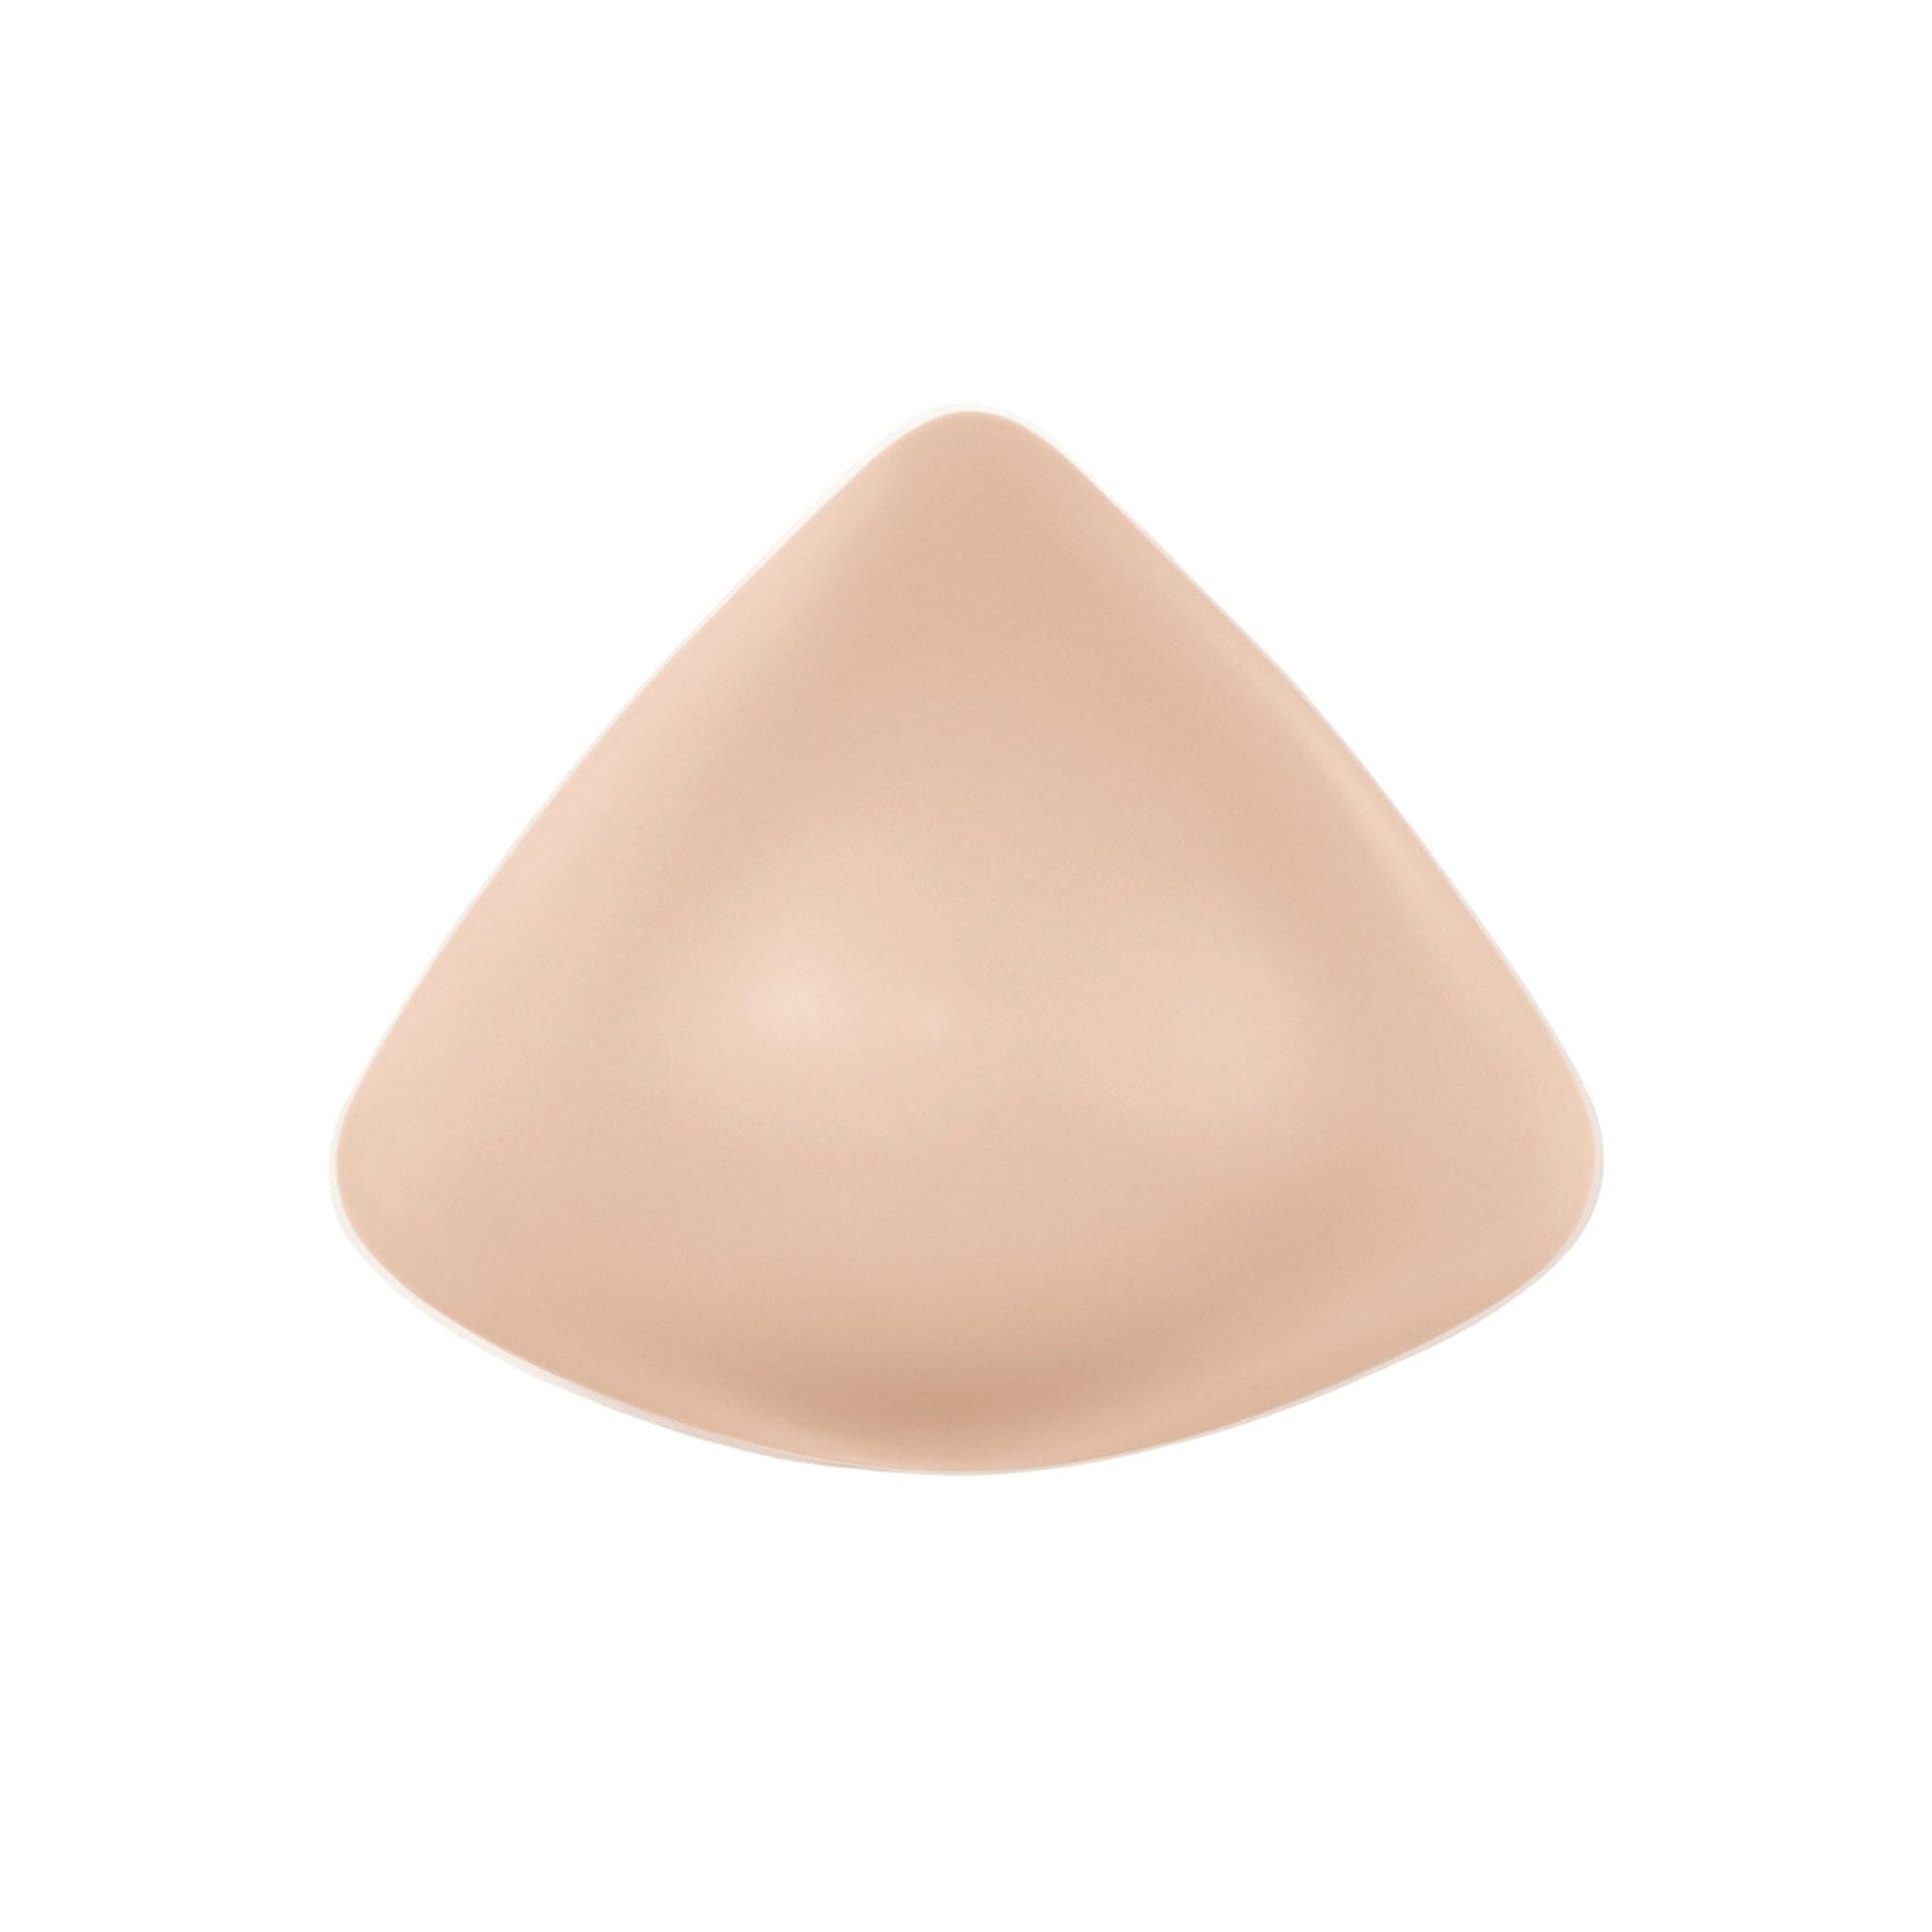 #9935 Amoena® Basic Light 2S Breast Form Front View